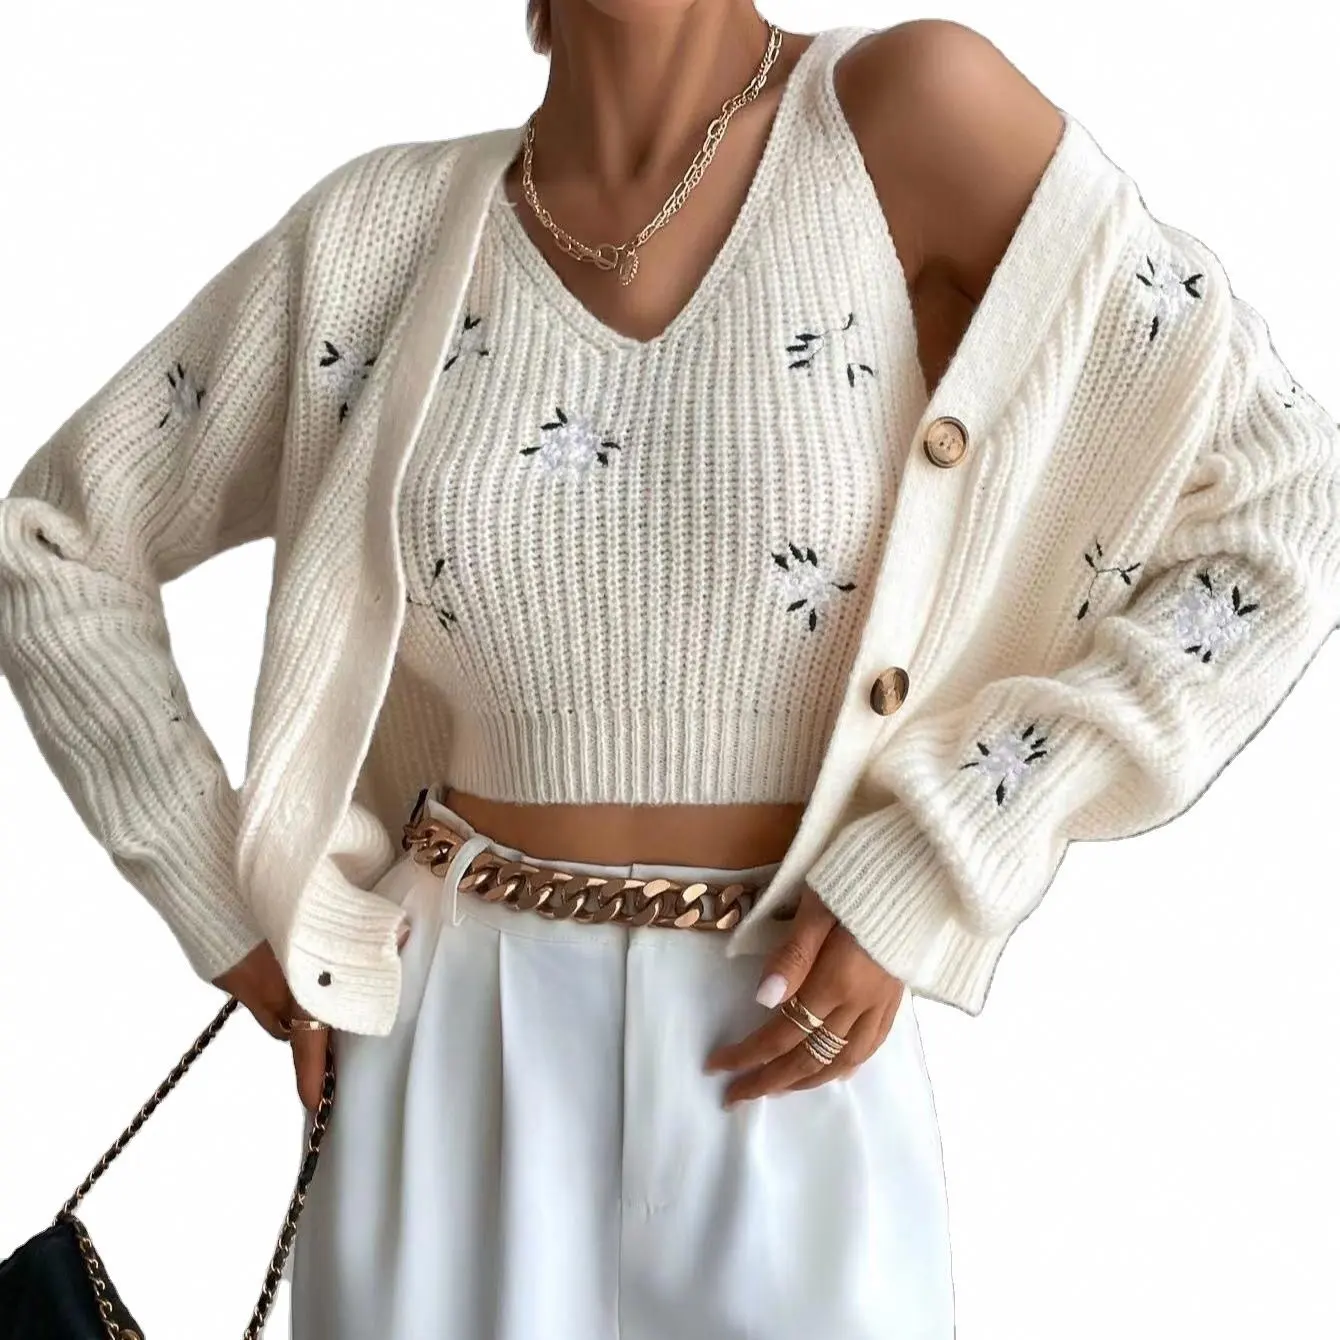 Wholesale Custom Knit Sexy Long Sleeve 2 Piece Cardigan Crop Tank Top Floral Embroidery Plus Size Woolen Sweater Set For Women